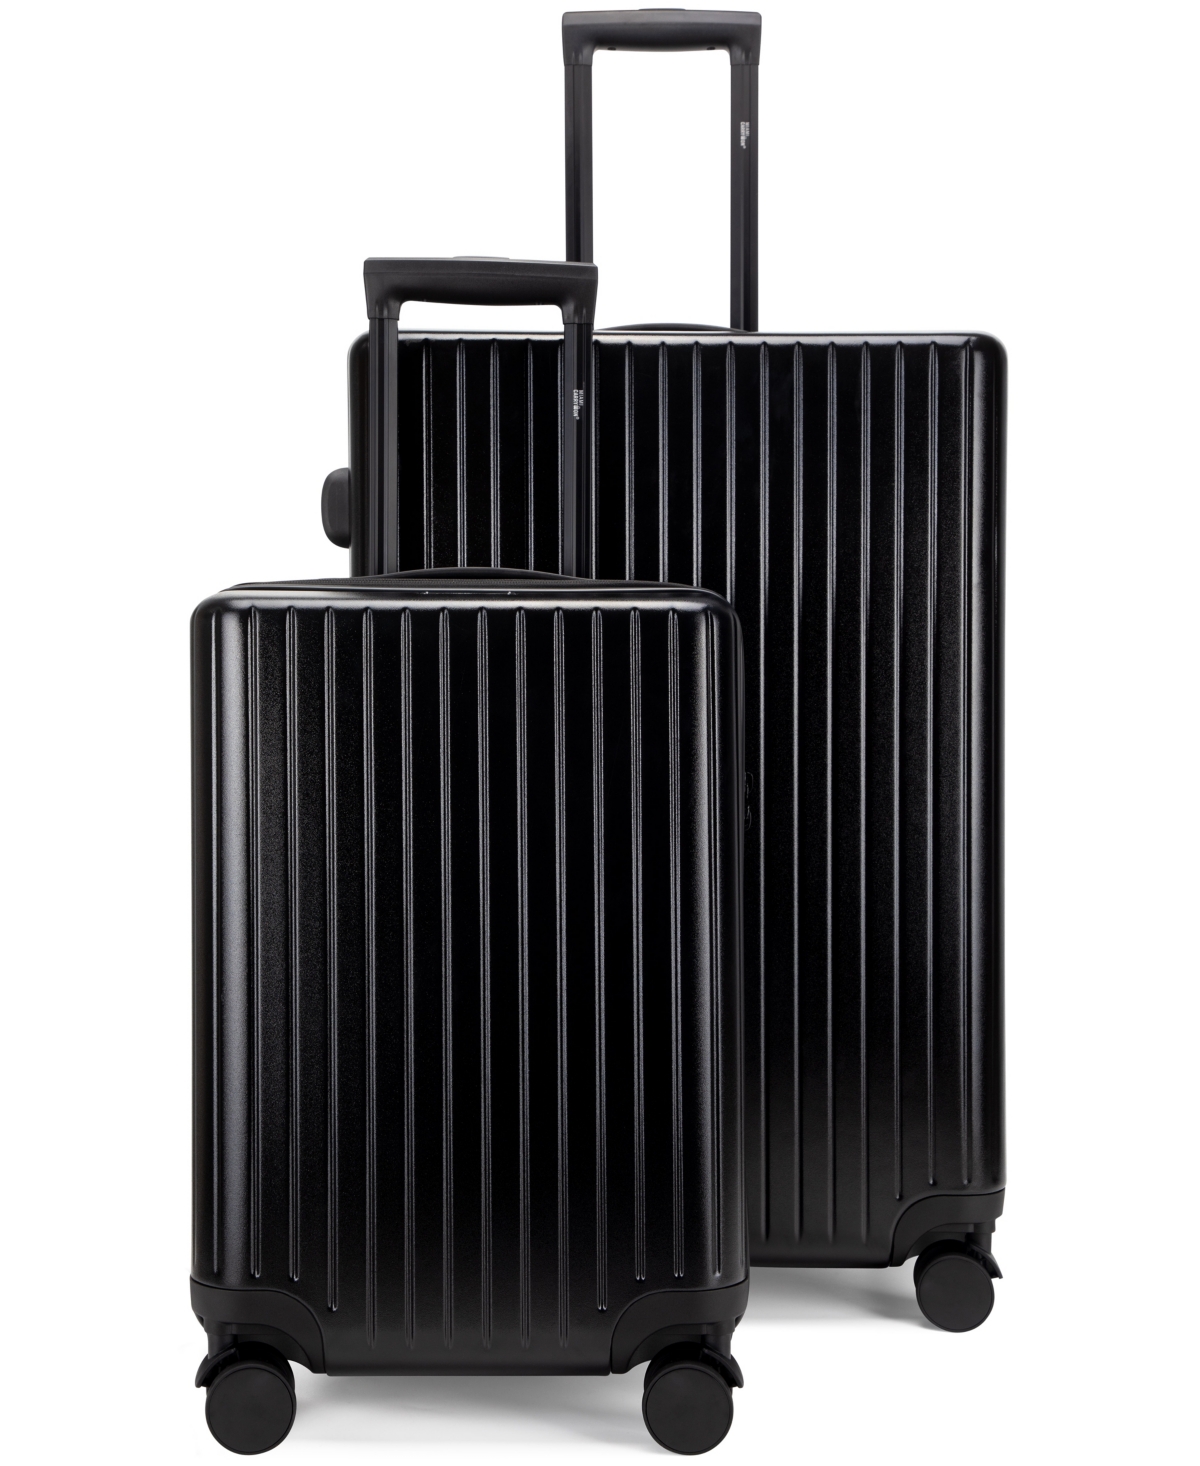 Ocean 2 Piece Polycarbonate Spinner Luggage Set - Navy